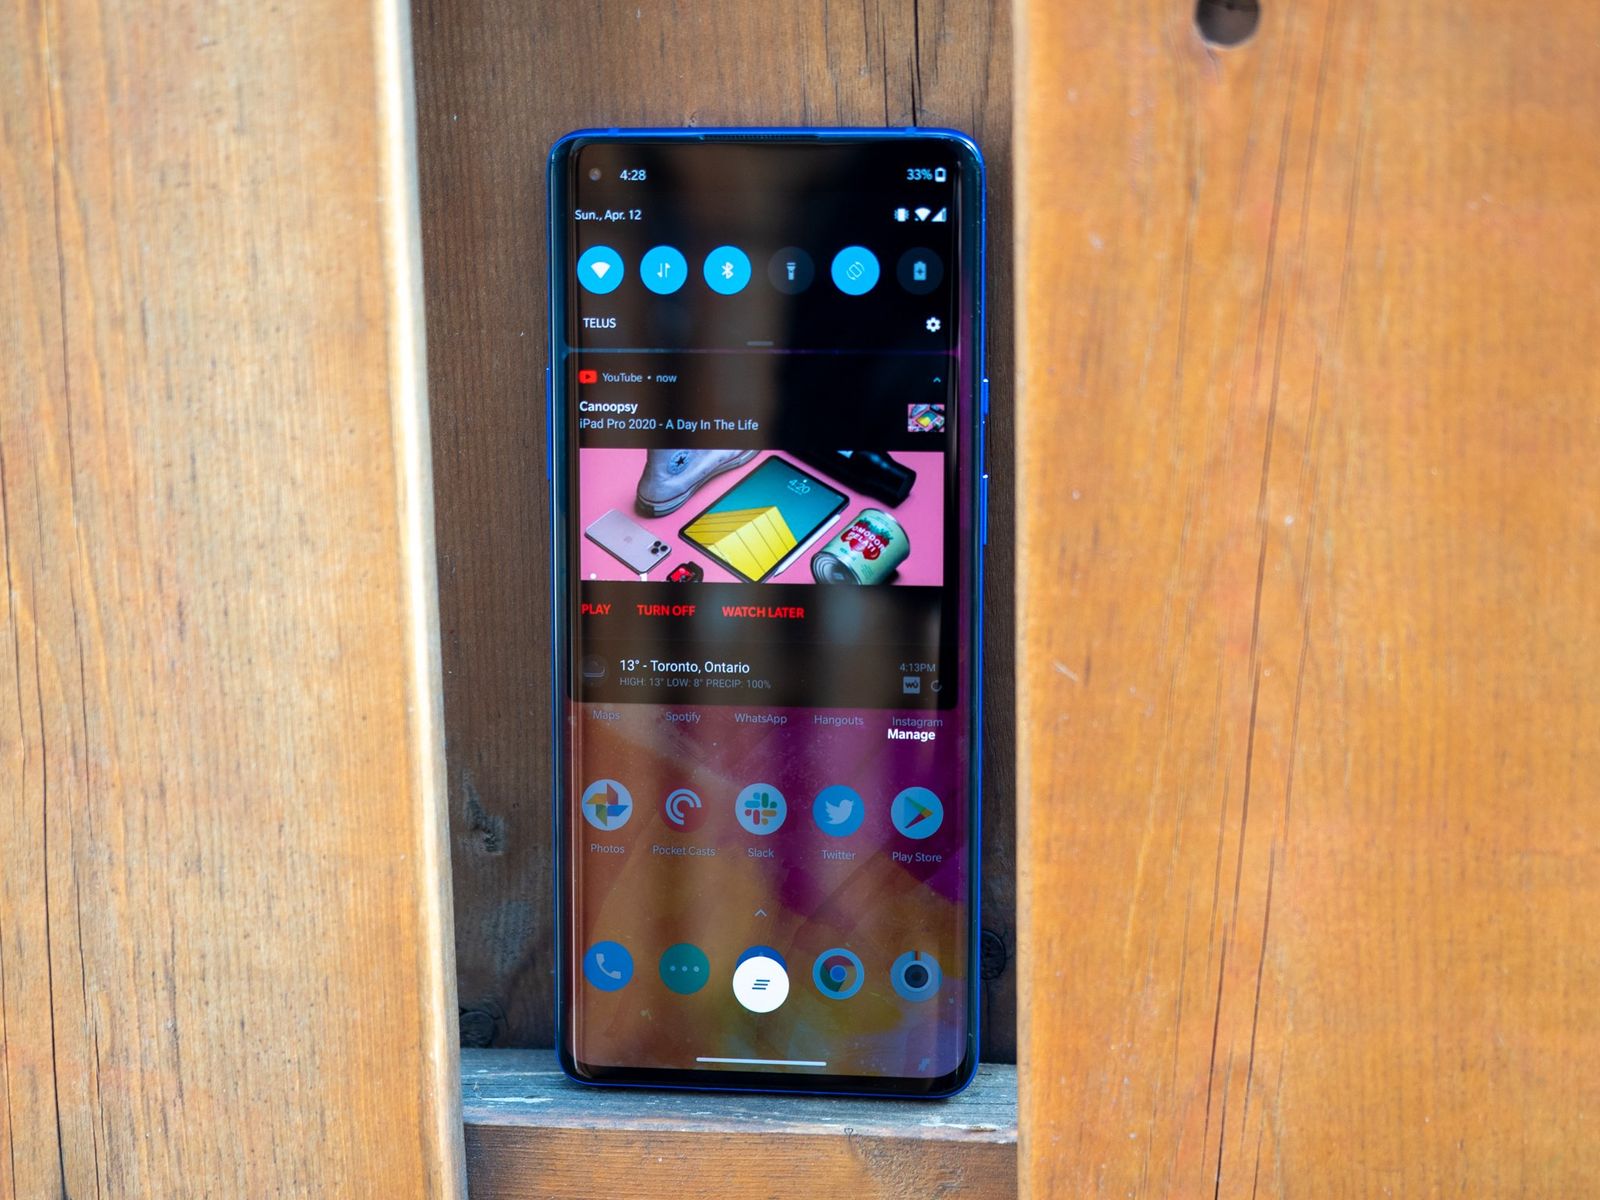 https://www.androidcentral.com/sites/androidcentral.com/files/styles/w1600h900crop_wm_brw/public/article_images/2020/04/oneplus-8-pro-review-37.jpg?itok=p_JFDAD3